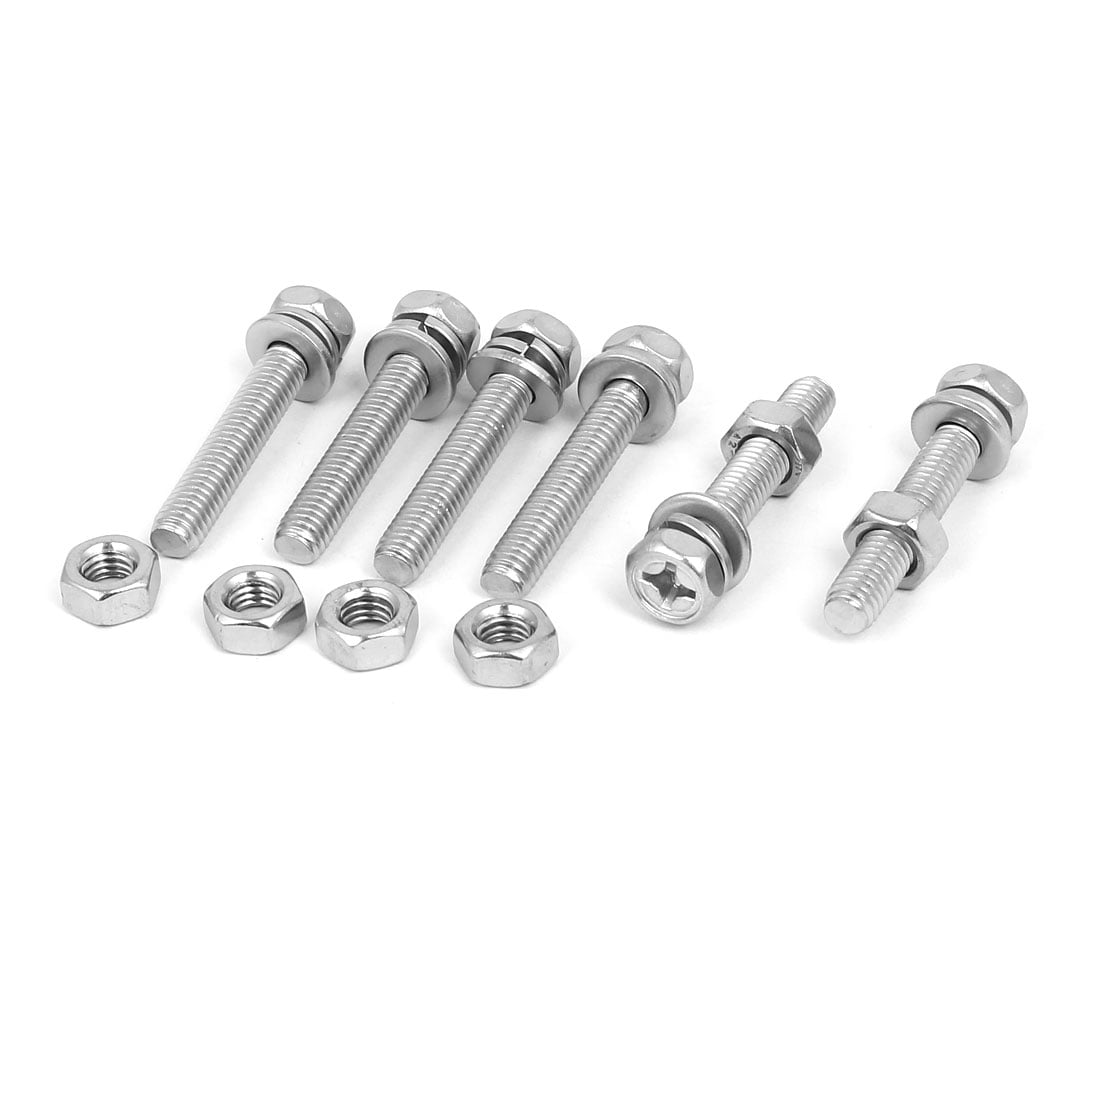 8.8 GRADE HEX HEAD BOLTS ZINC PLATED Details about   30 x M6 by 35mm 